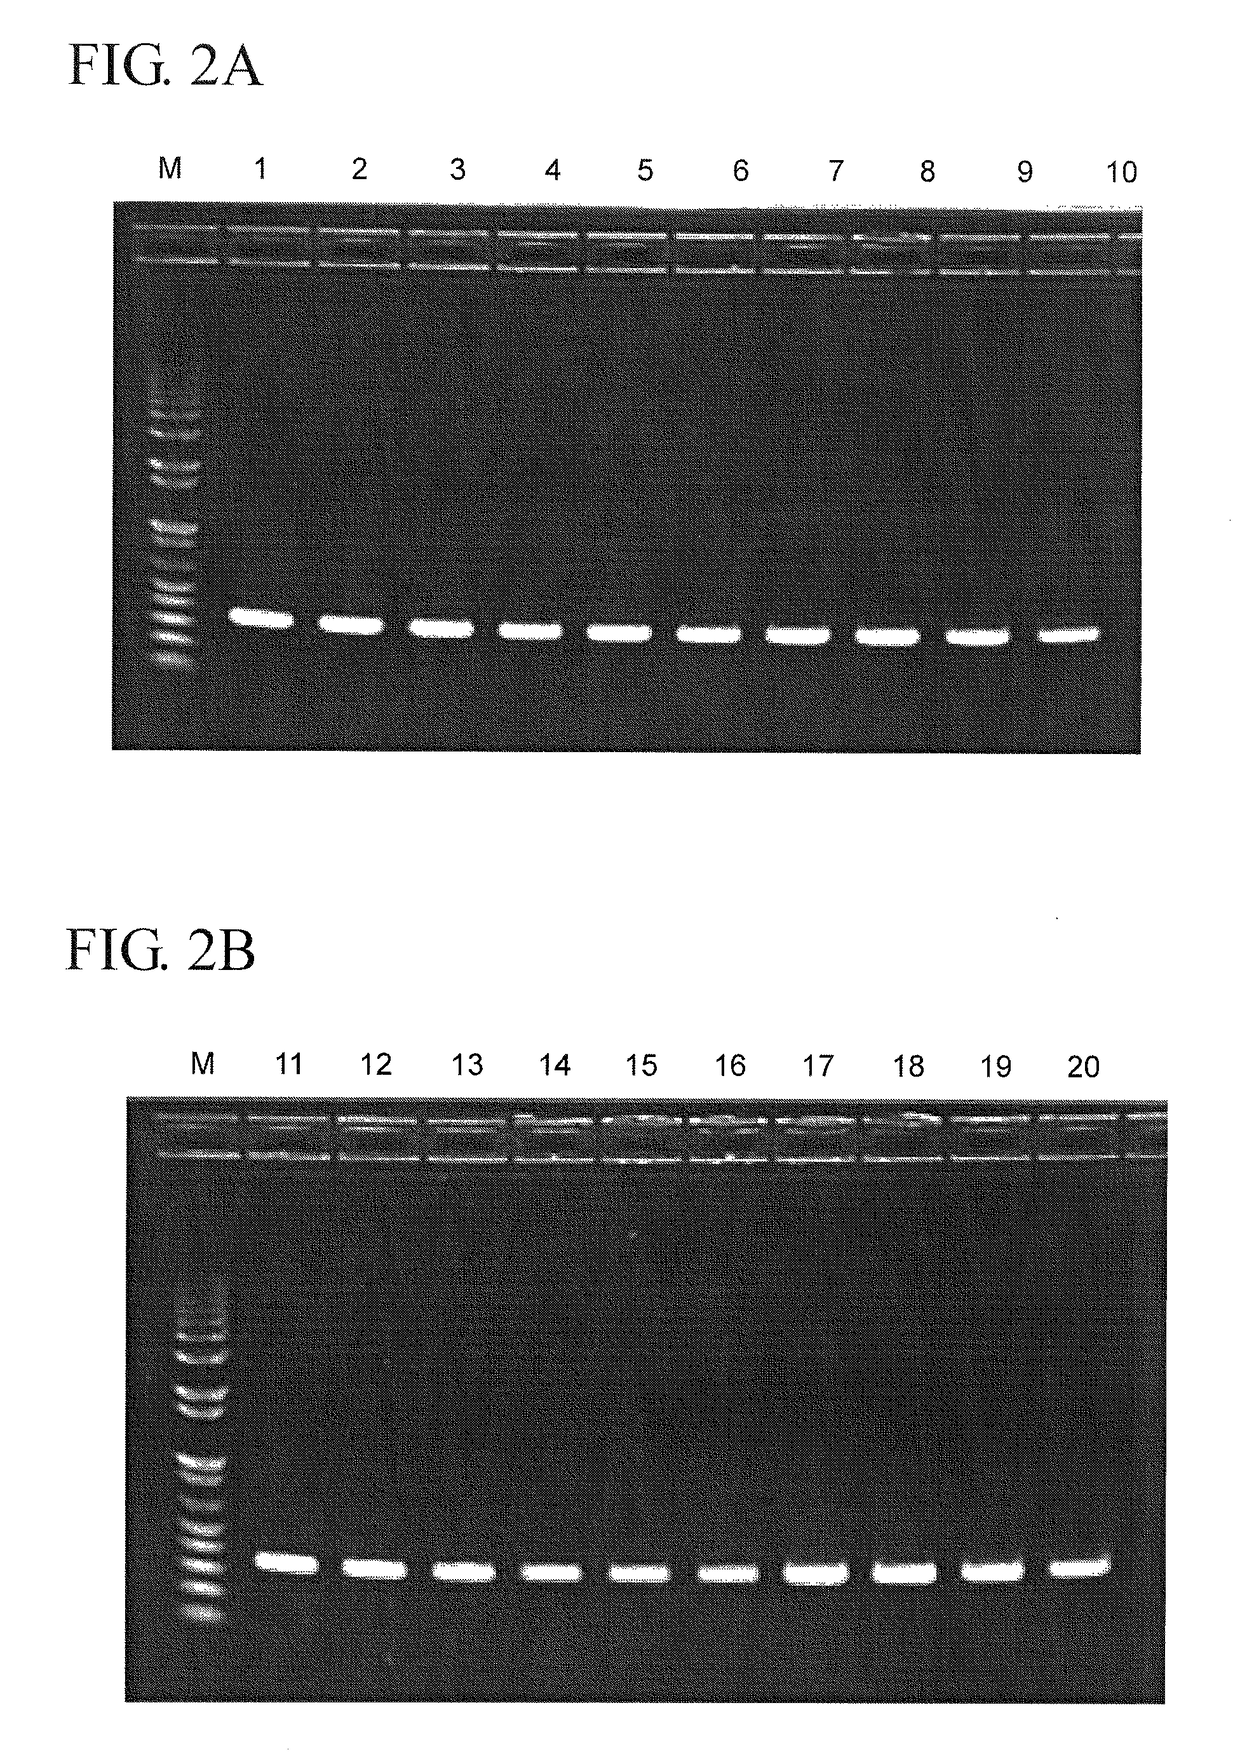 Method for linking point of care rapid diagnostic testing results to laboratory-based methods